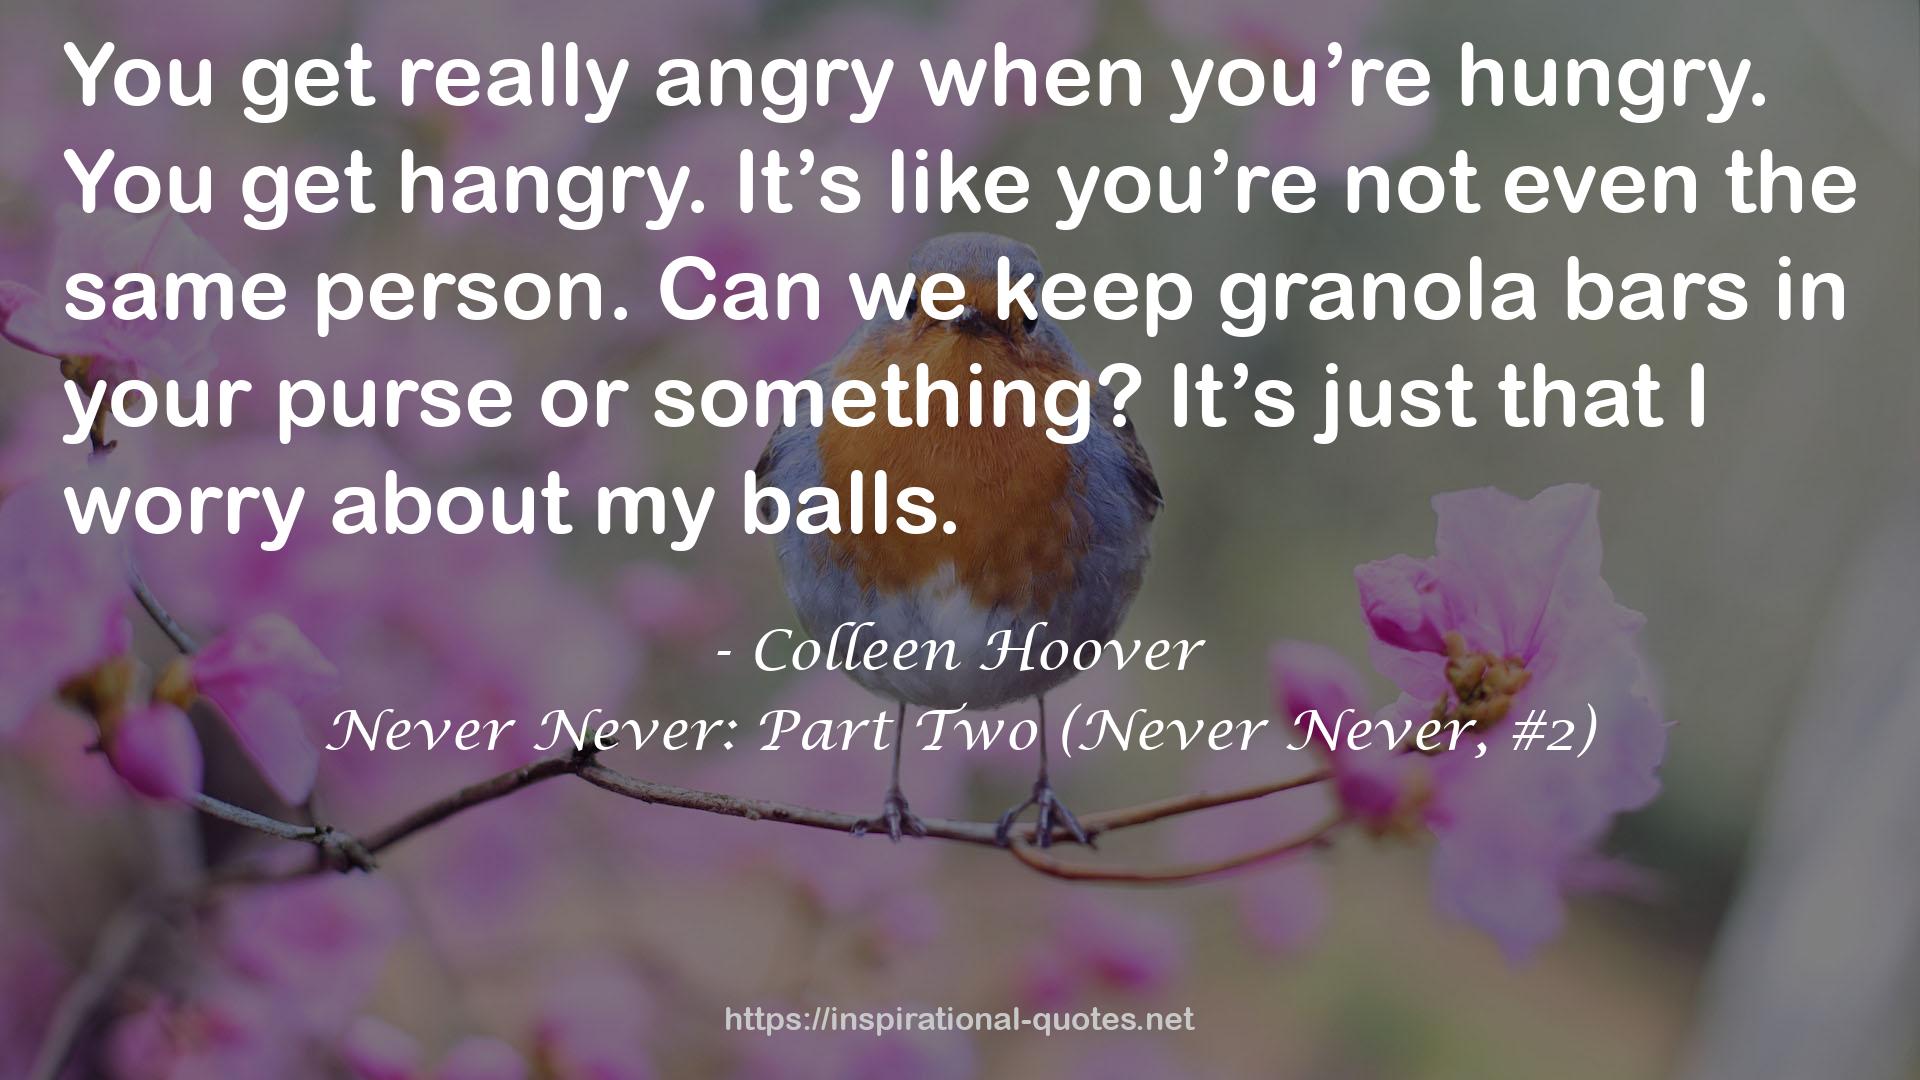 Never Never: Part Two (Never Never, #2) QUOTES